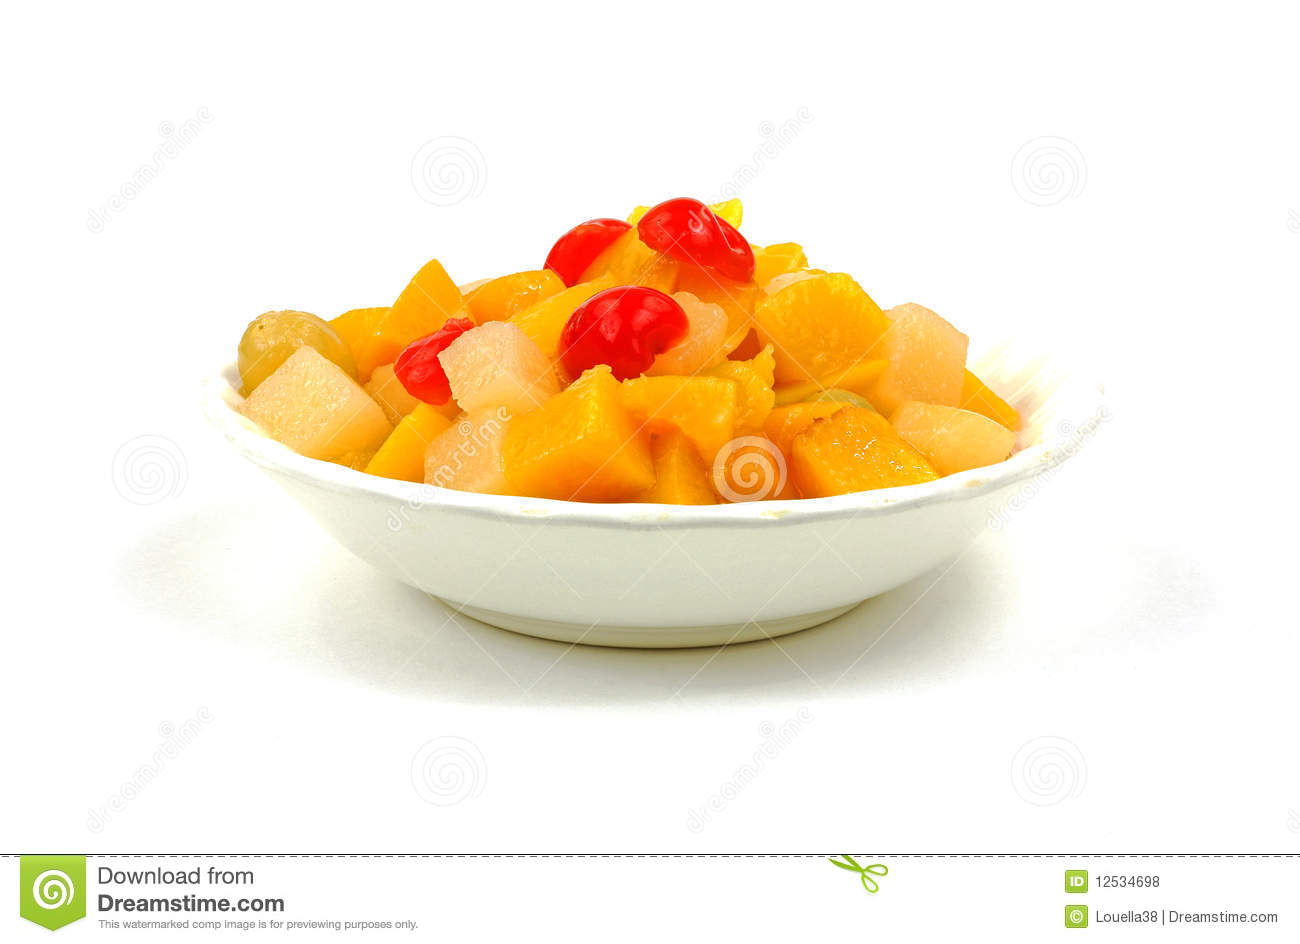 Canned Fruit Cocktail Royalty Free Stock Photos   Image  12534698